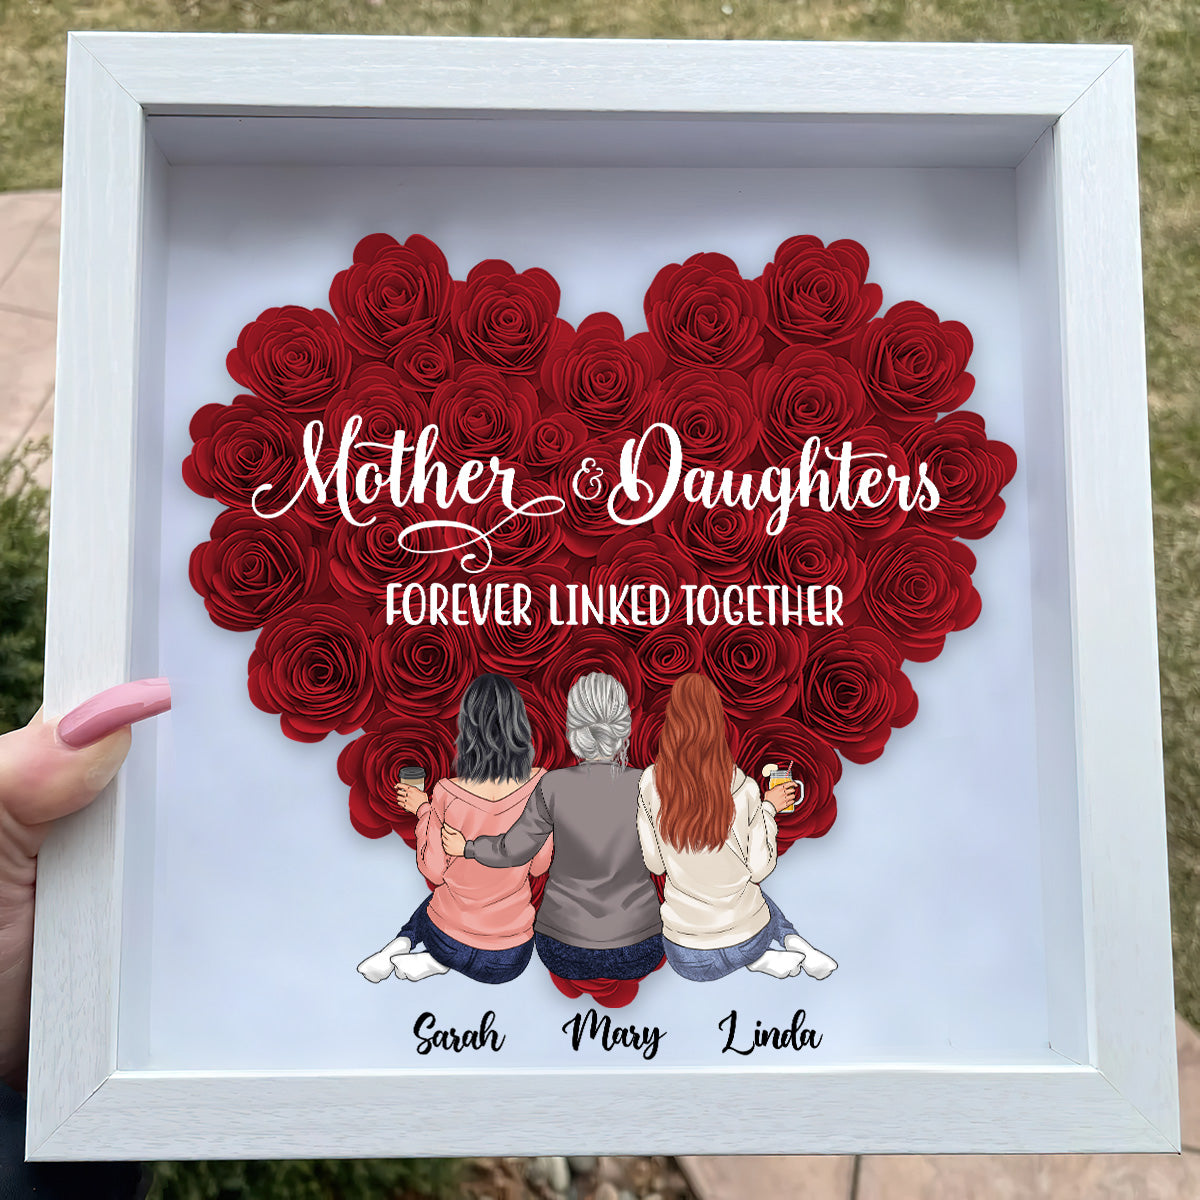 Discover Mother And Daughters - Gift for mom, daughter, son - Personalized Flower Frame Box